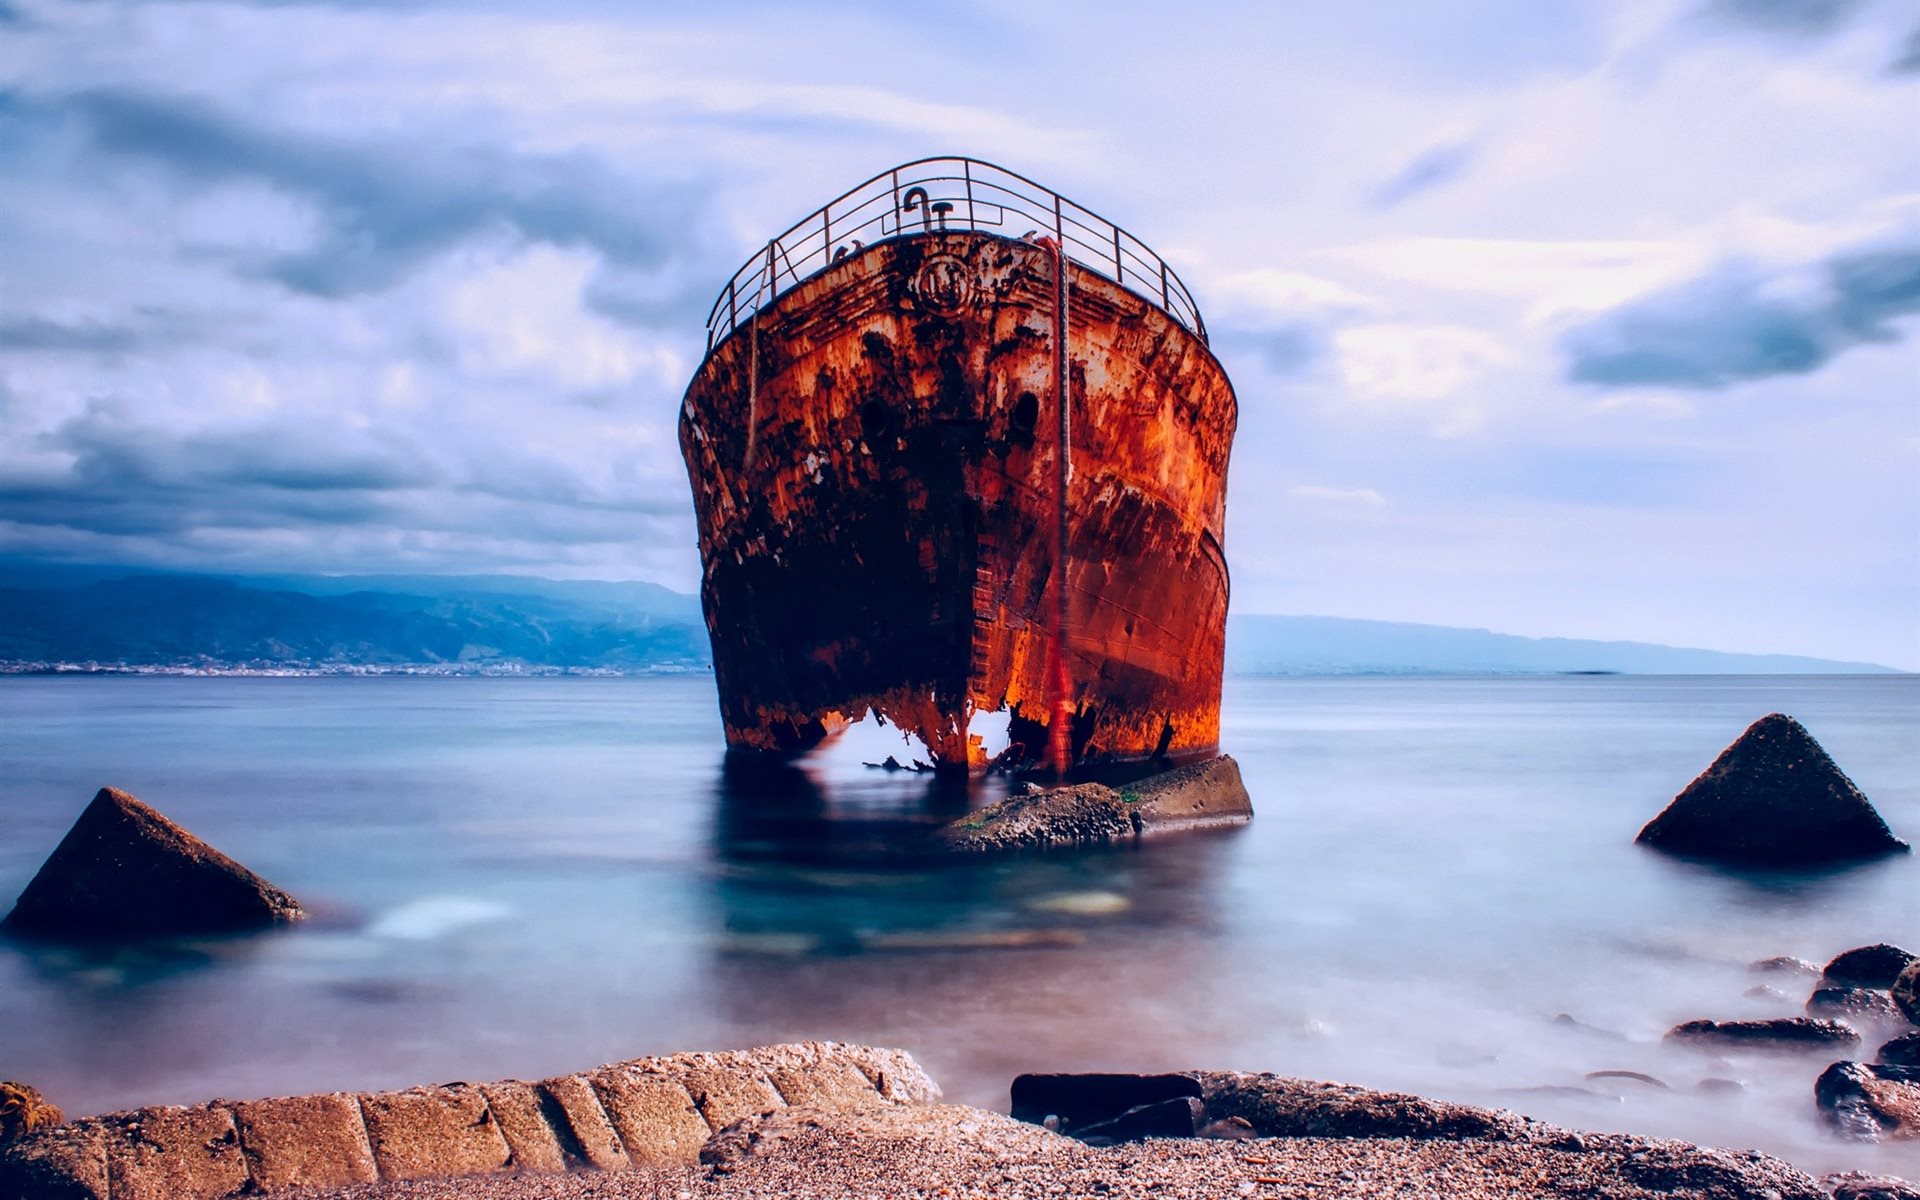 Download wallpaper sunken ship, beach, sea, coast, abandoned ship, evening for desktop with resolution 1920x1200. High Quality HD picture wallpaper